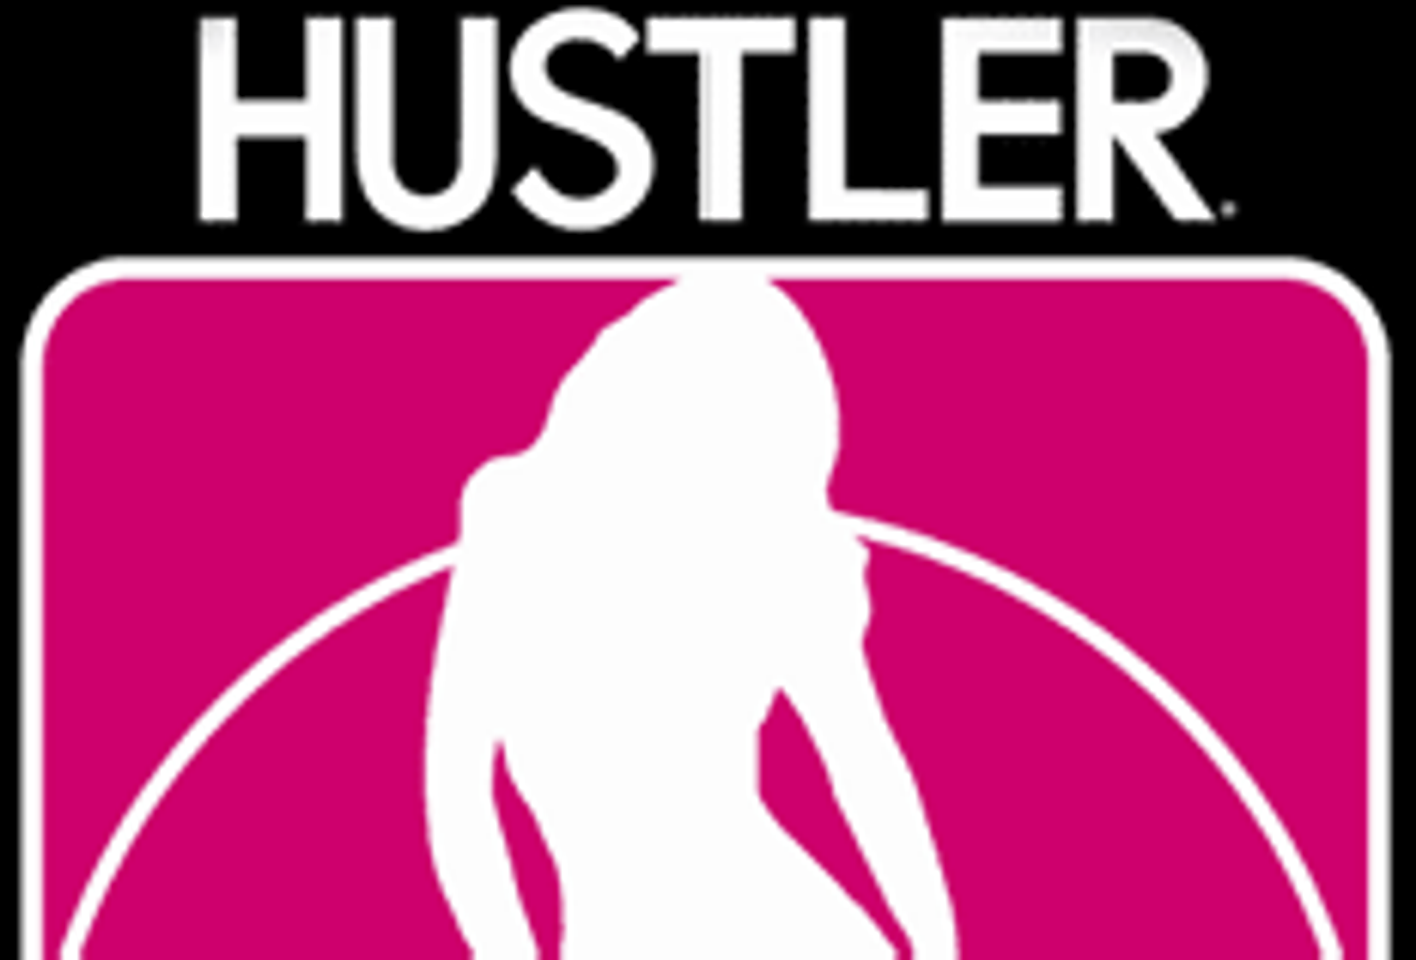 Hustler Hosts Signing, Introduces New Contract Girl